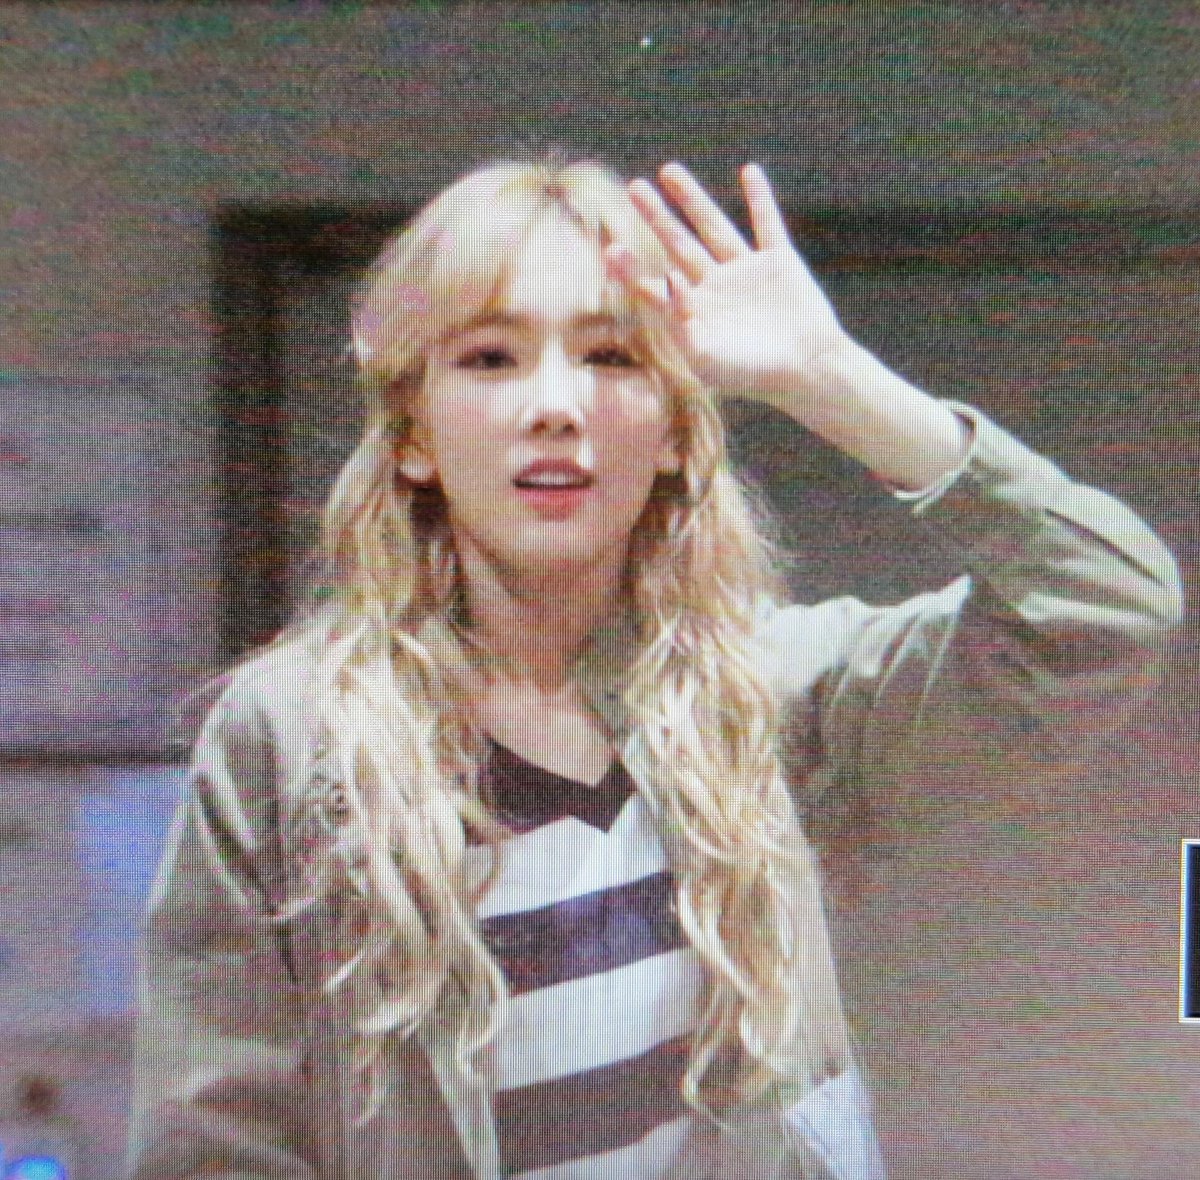 [PIC][17-09-2015]TaeYeon tổ chức Solo Concert "A Very Special Day" trong chuối Series Concert - "THE AGIT" của SM Entertainment tại SM COEX - Page 2 CSffqZ7UwAAJGQV